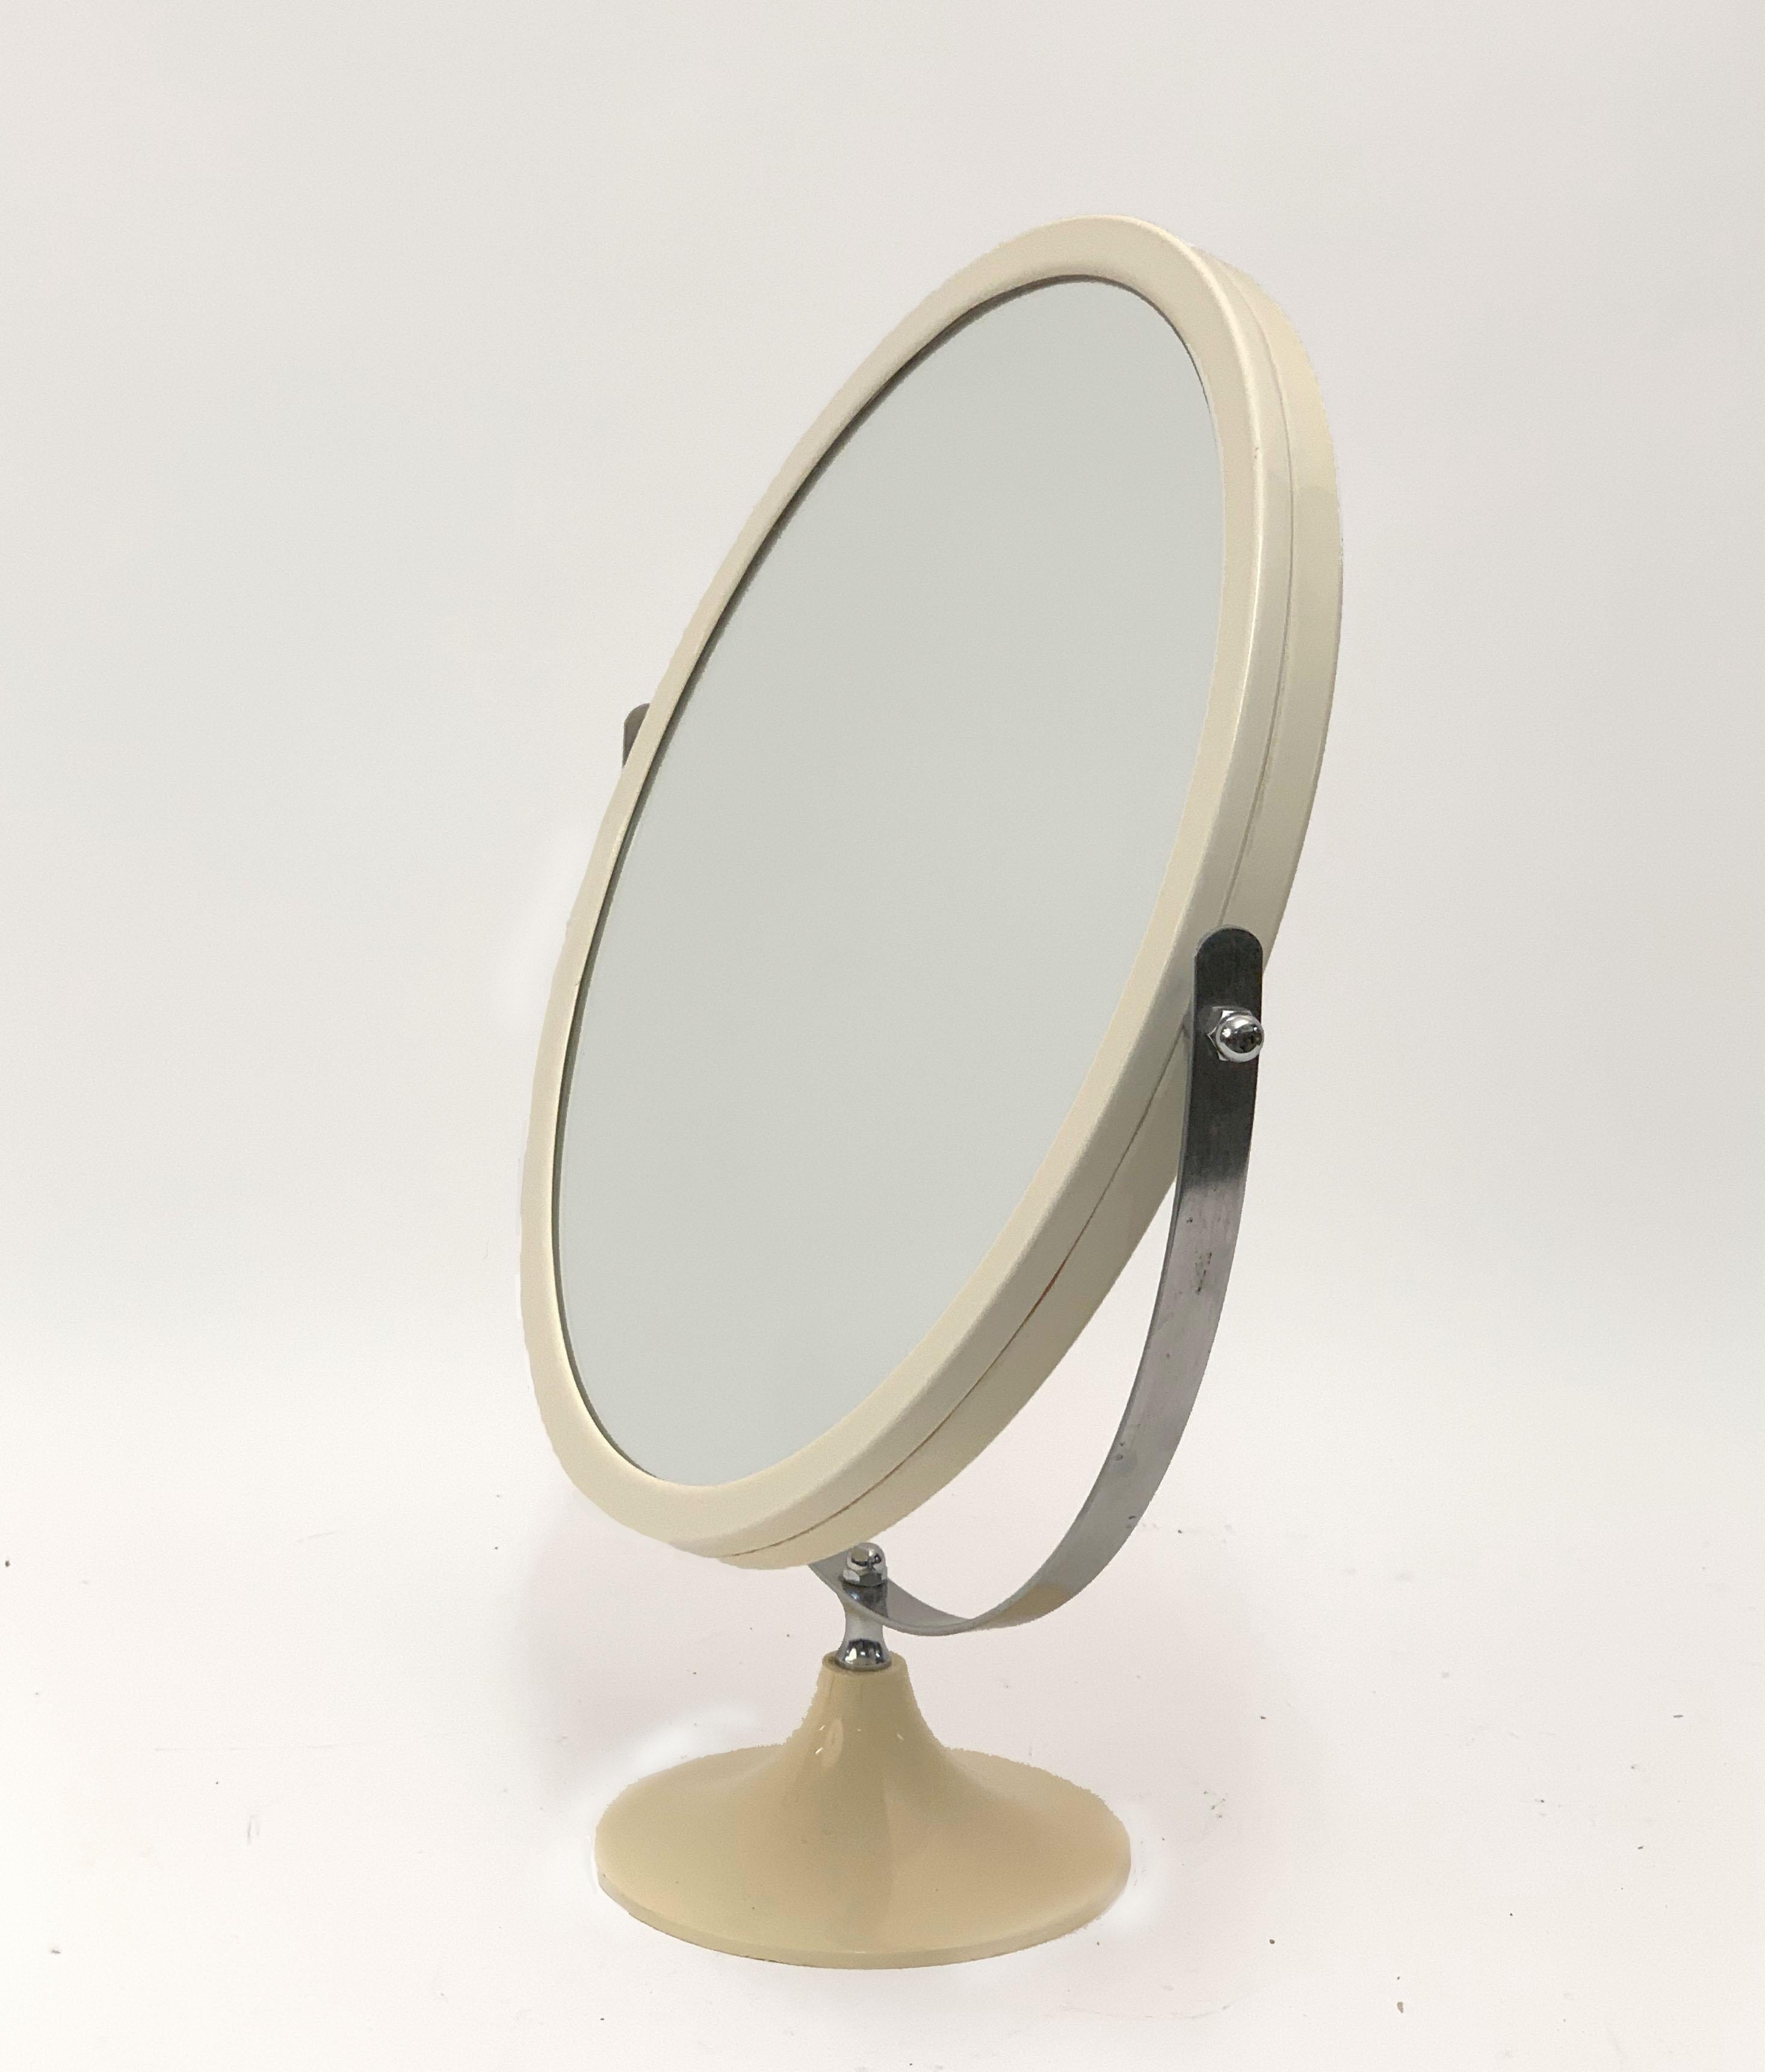 Midcentury Metal and White Plastic Round Italian Table Mirror, Italy, 1980s For Sale 7